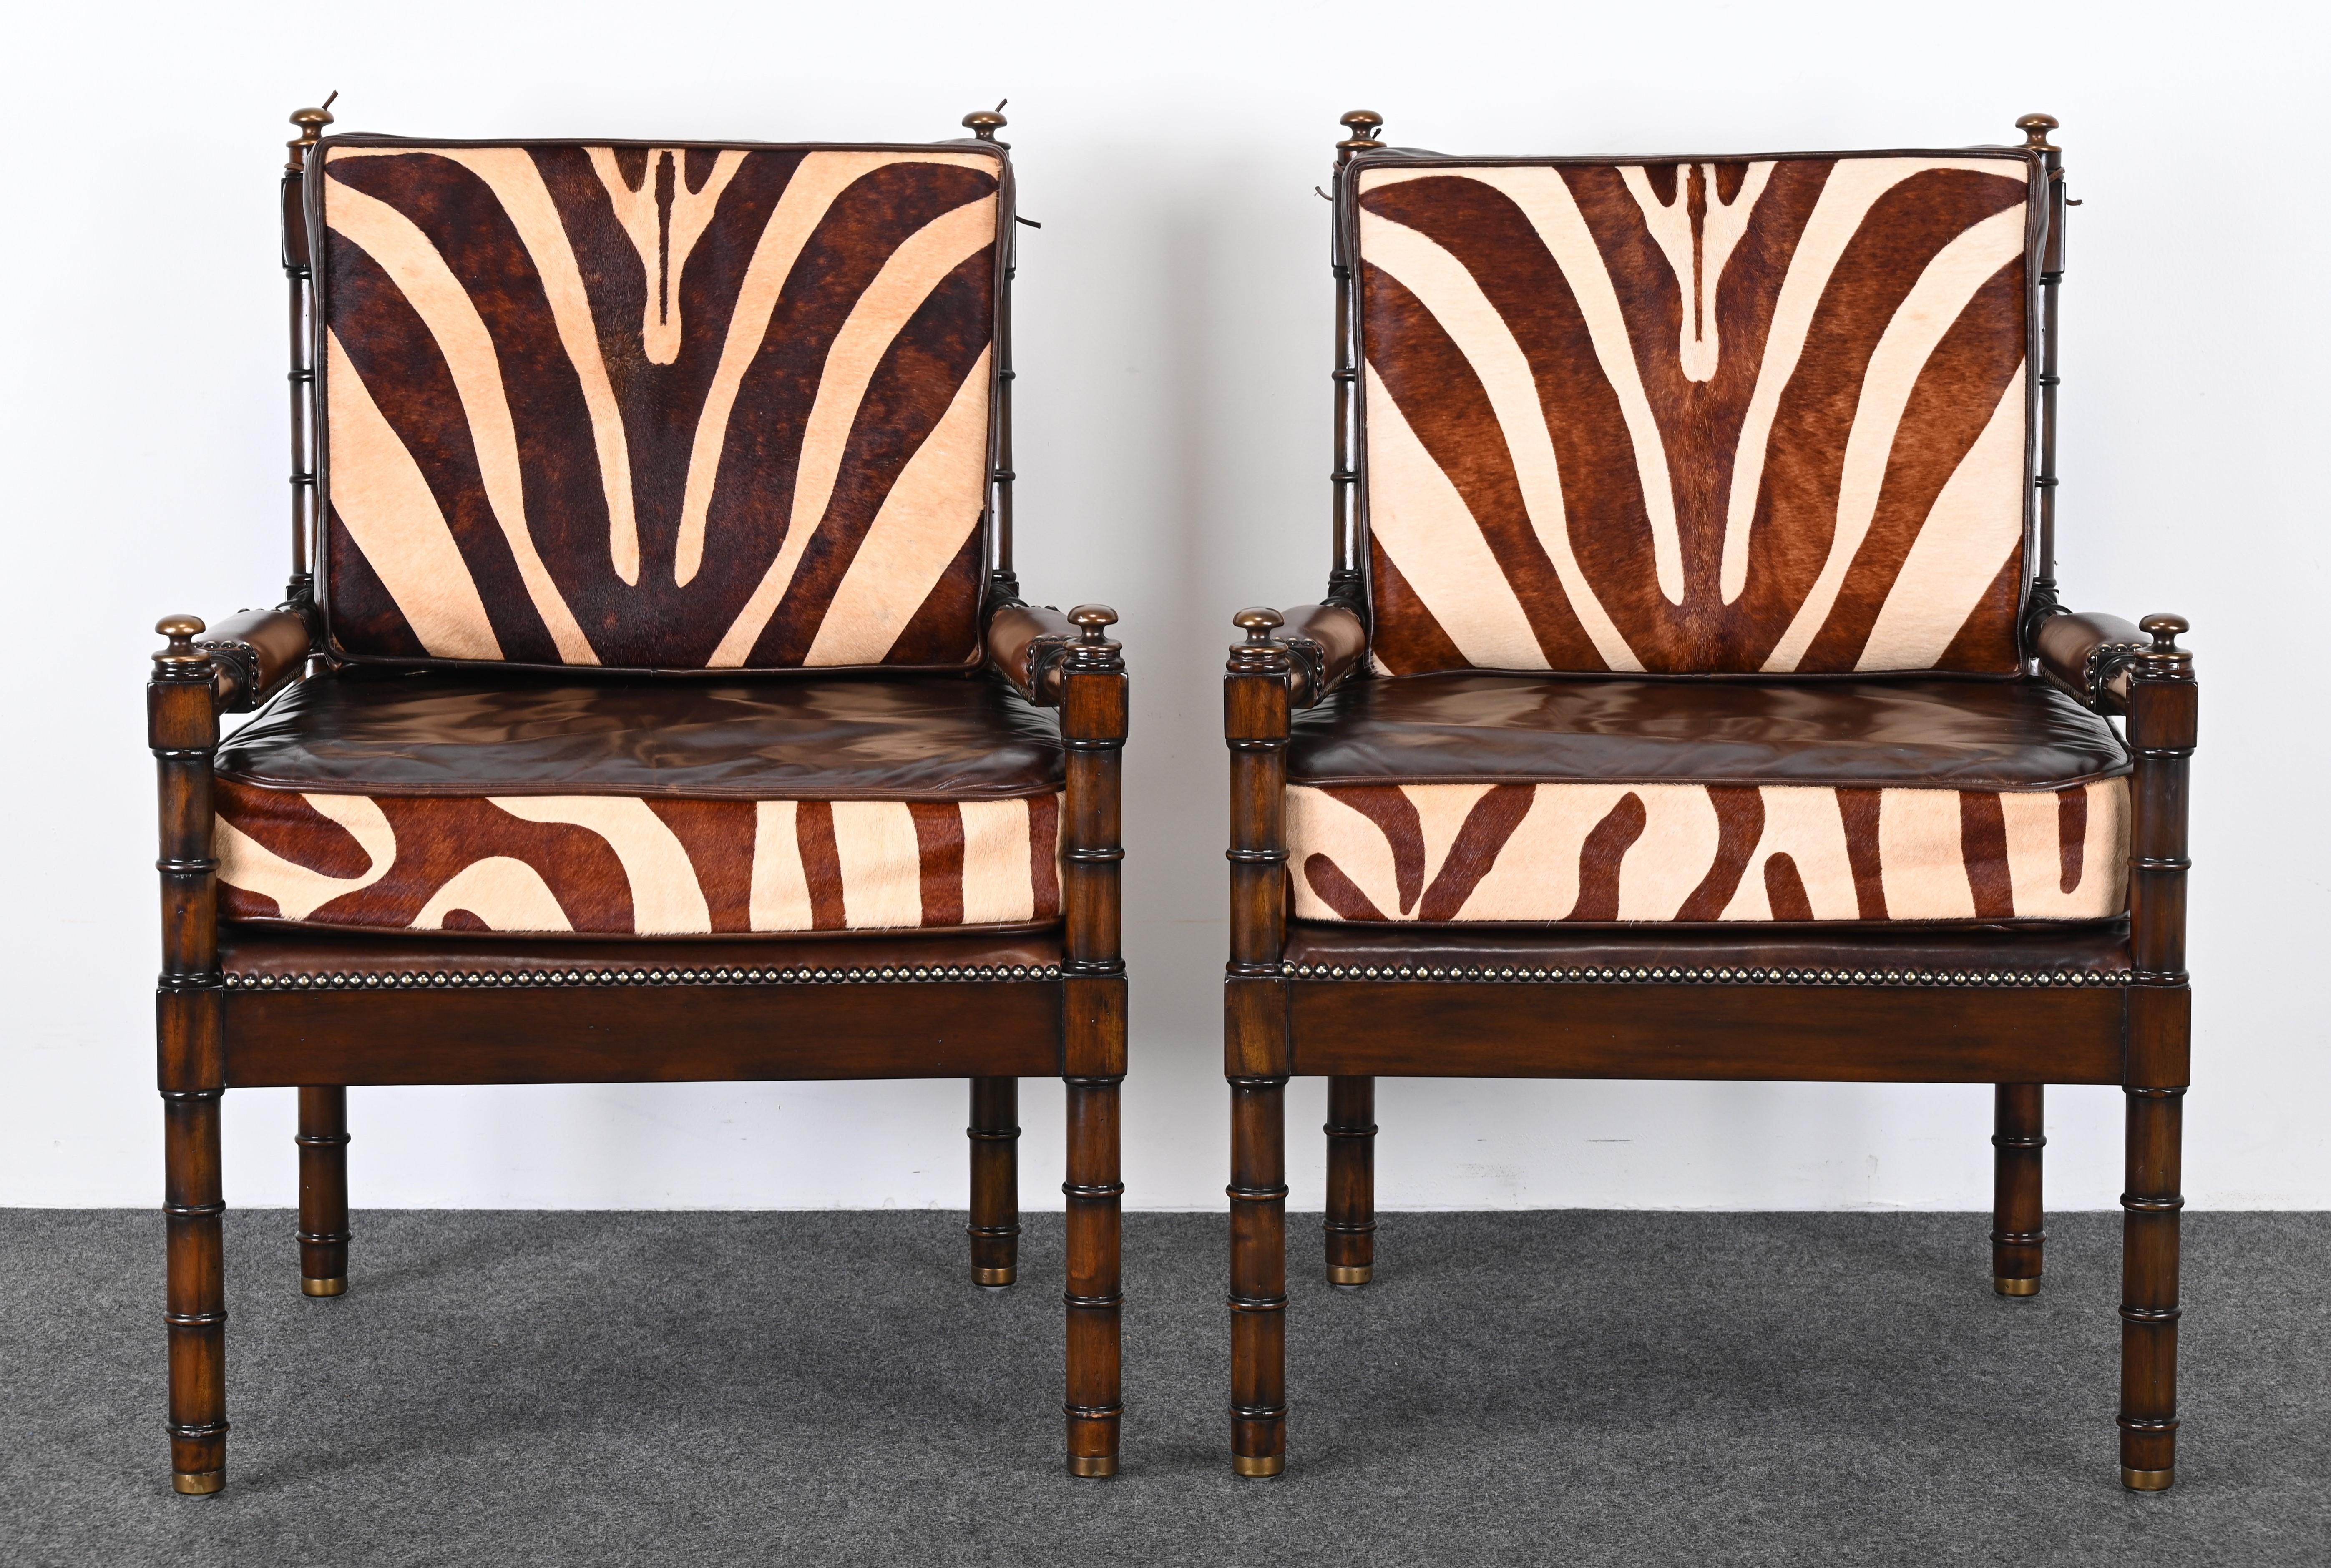 Maitland Smith Bamboo Armchairs with Cowhide Zebra Print Leather Seats, 1990s For Sale 1